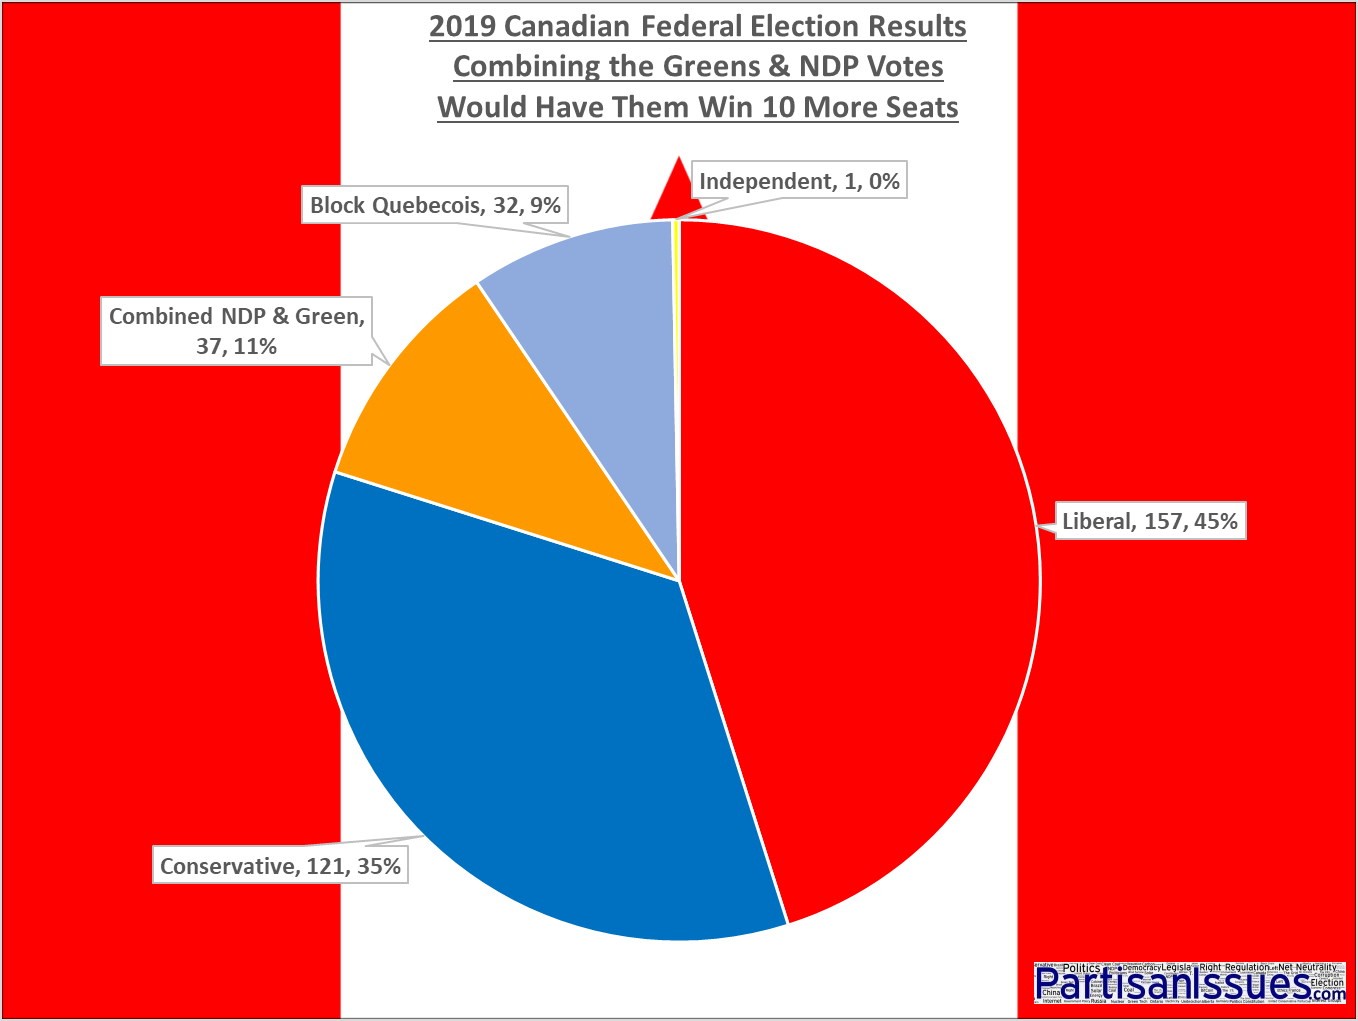 2019 Canadian Federal Election Results Combining Greens and NDP